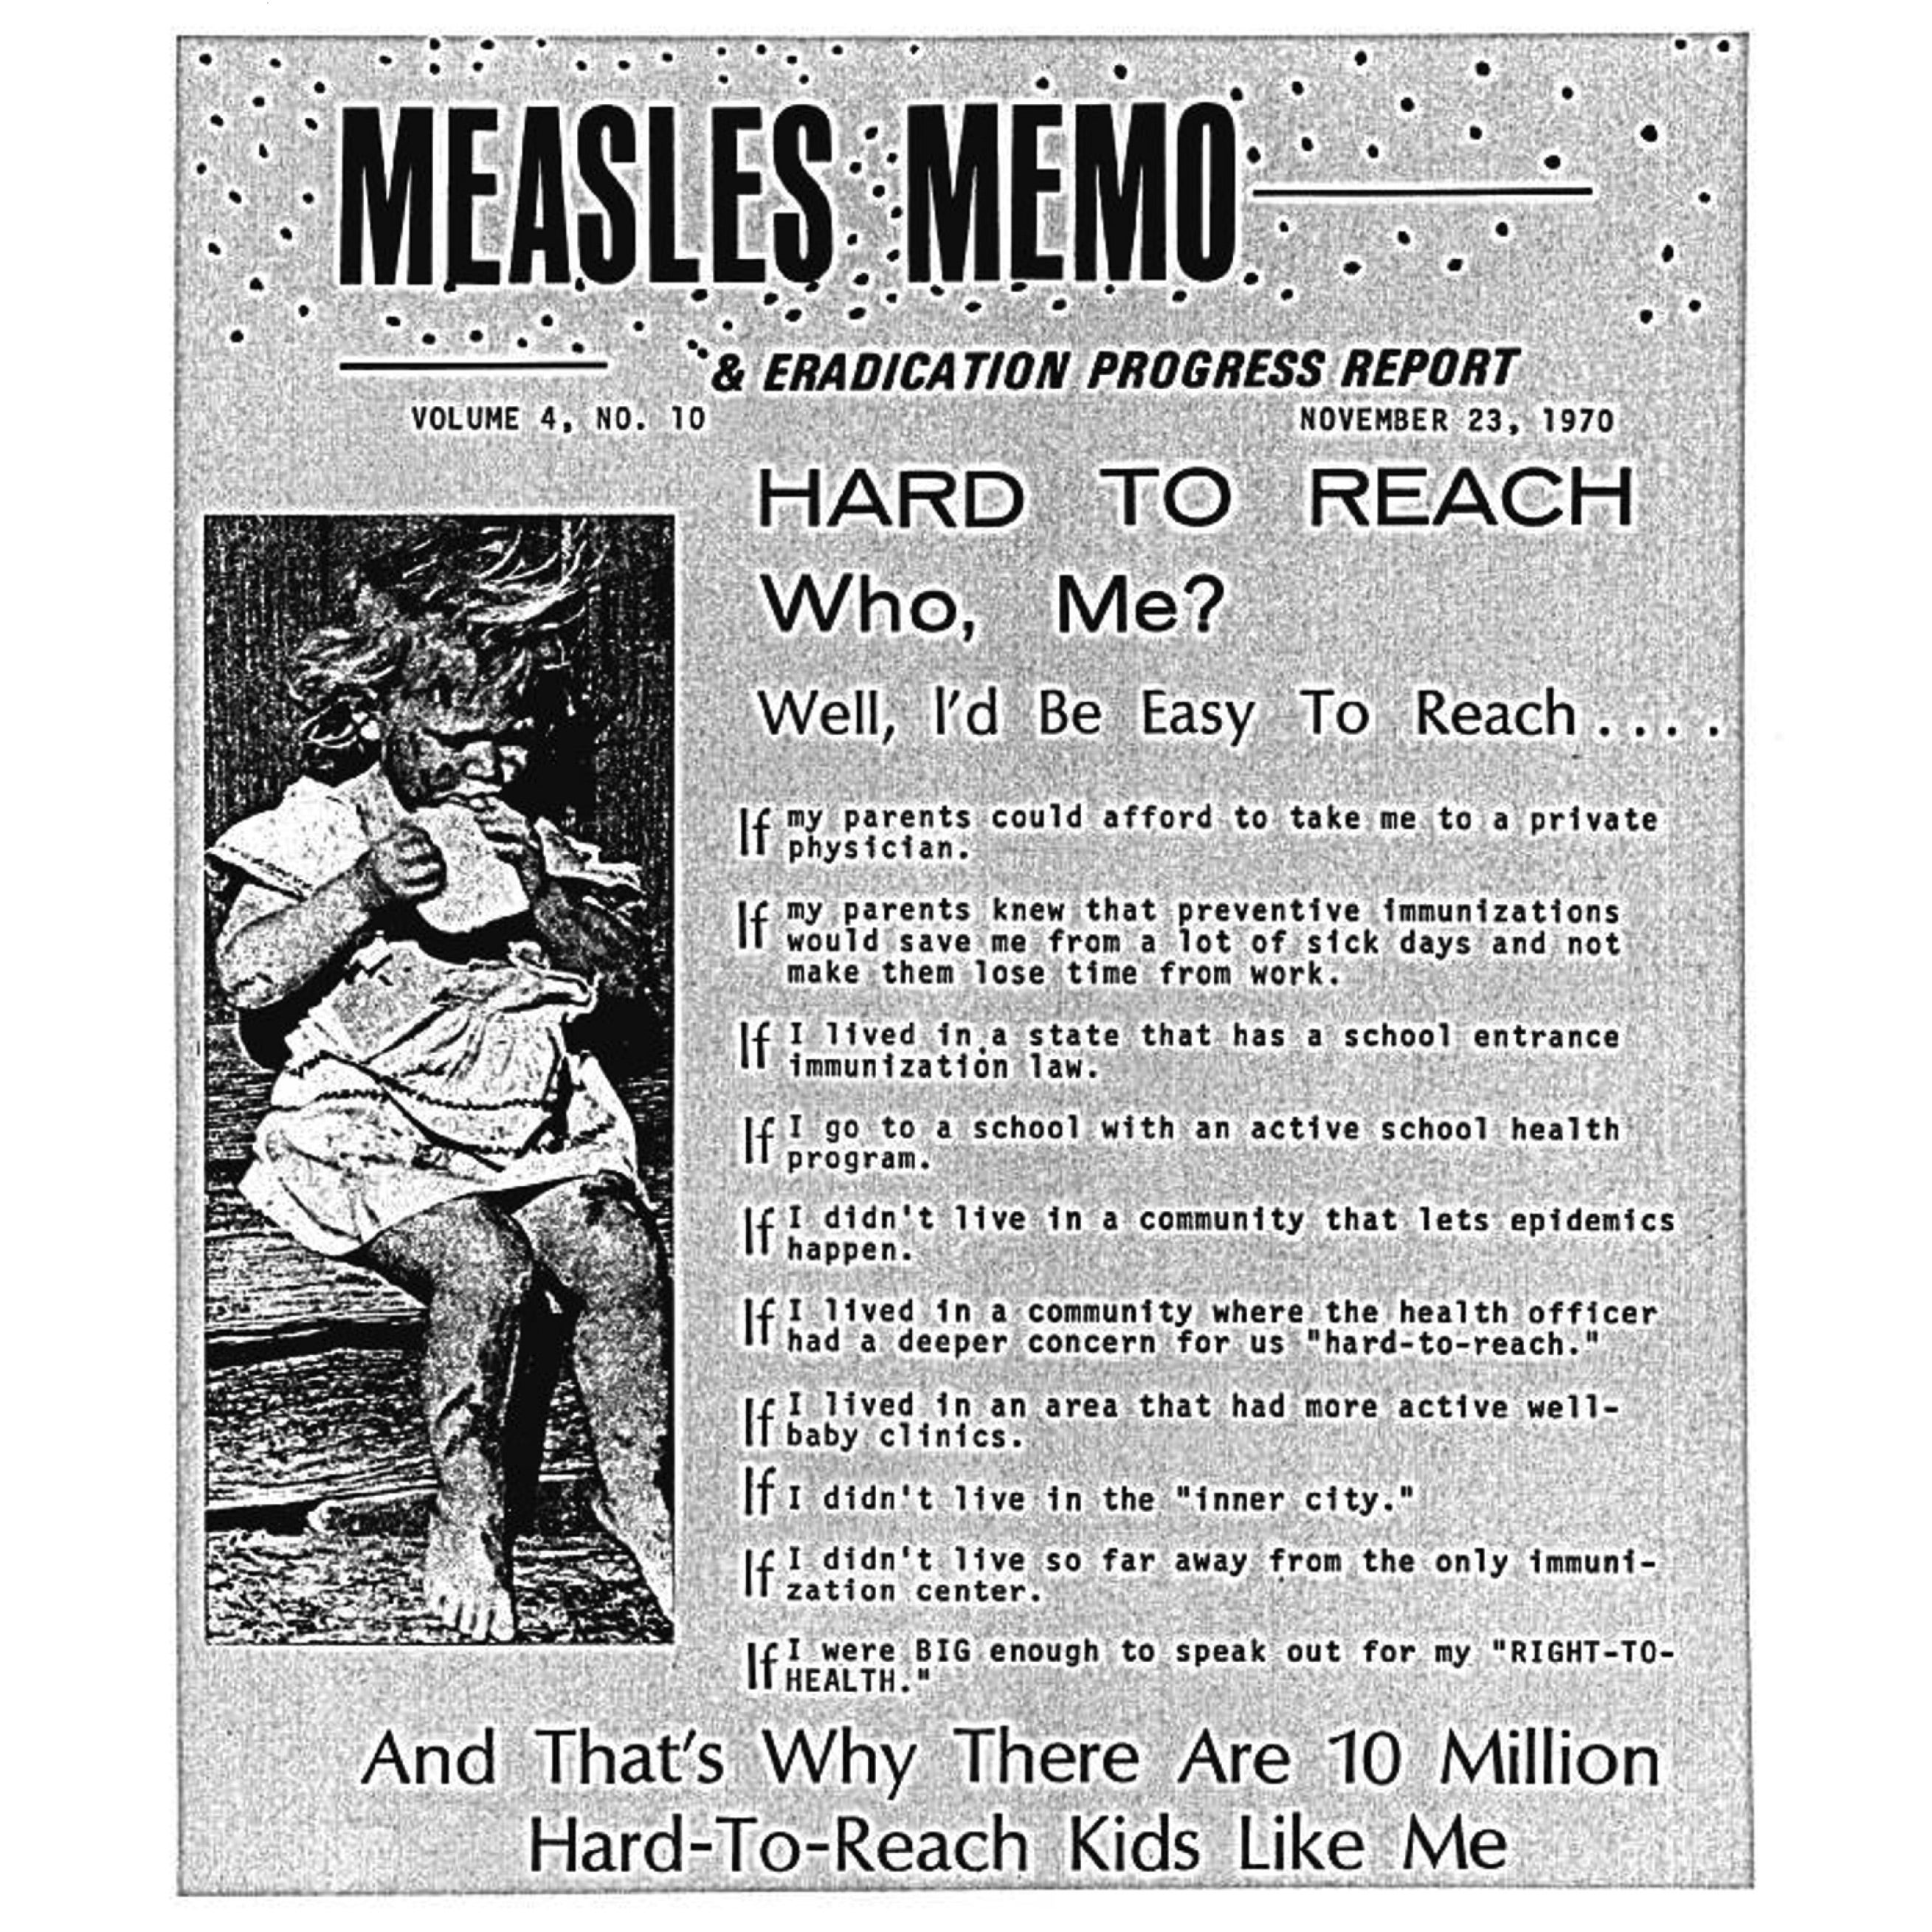 A memo listing reasons why the measles vaccine isn't reaching certain kids